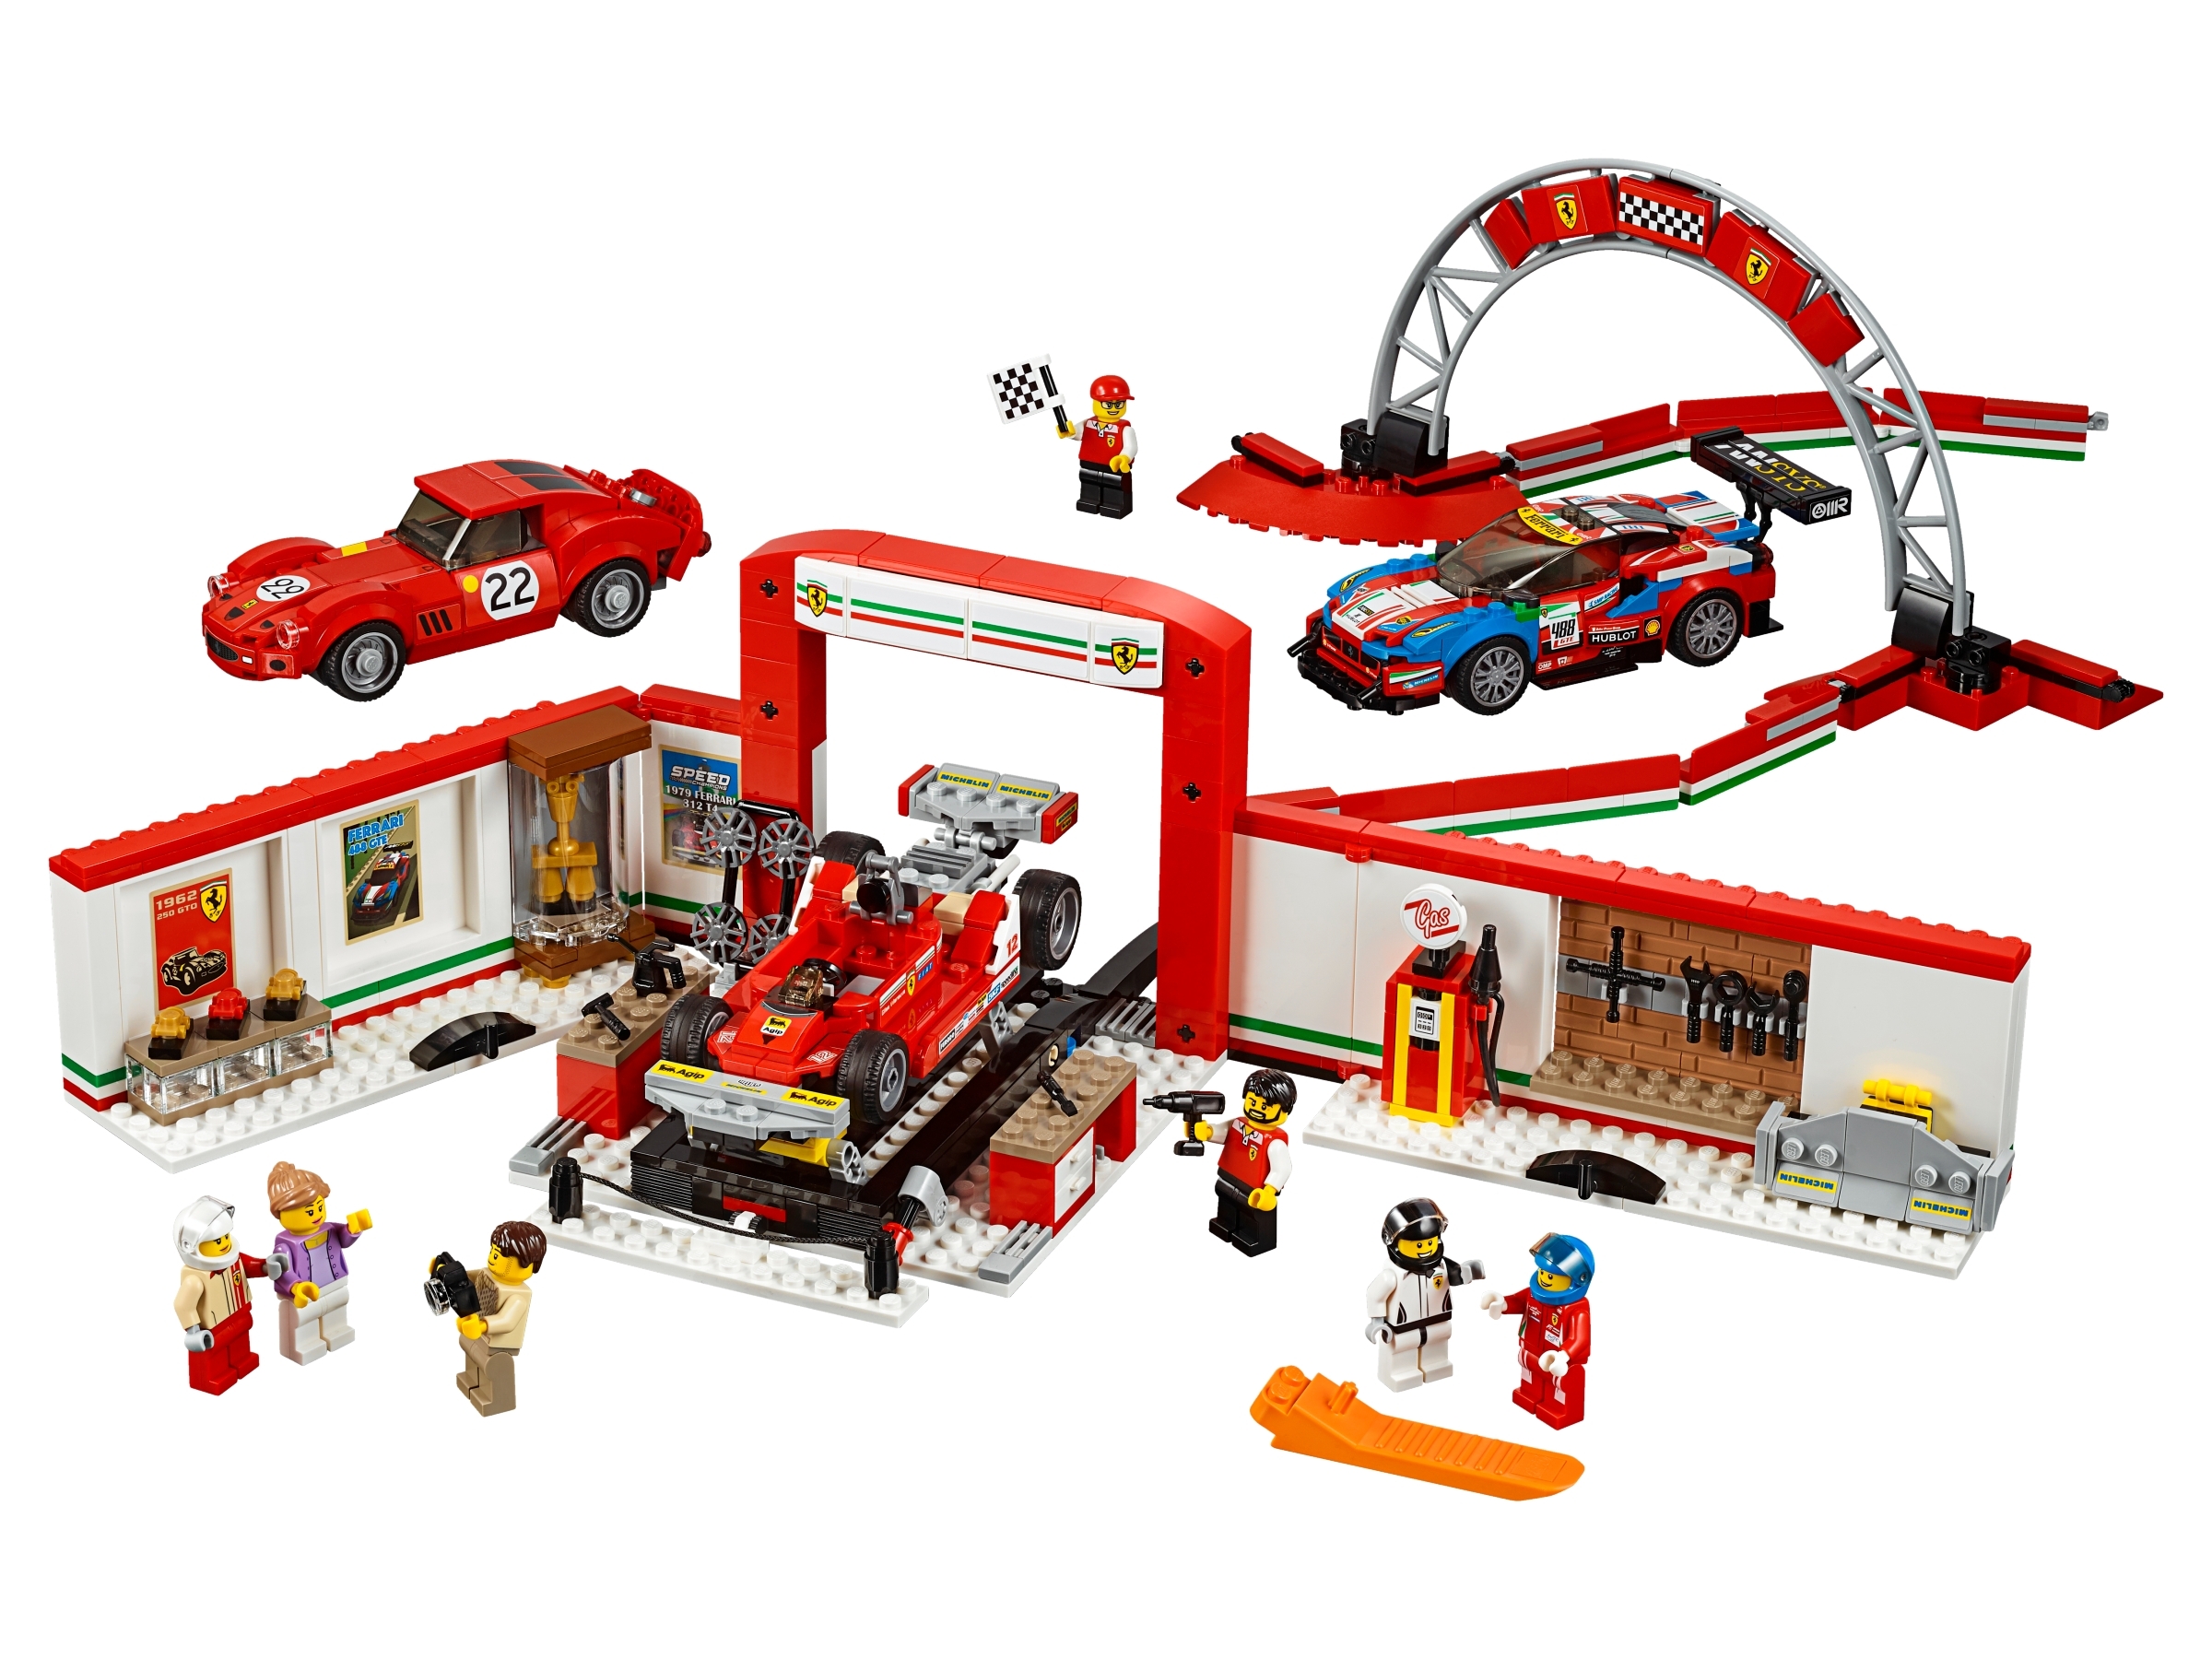 Ferrari Ultimate Garage 75889 | Champions | Buy online at the Official LEGO® Shop